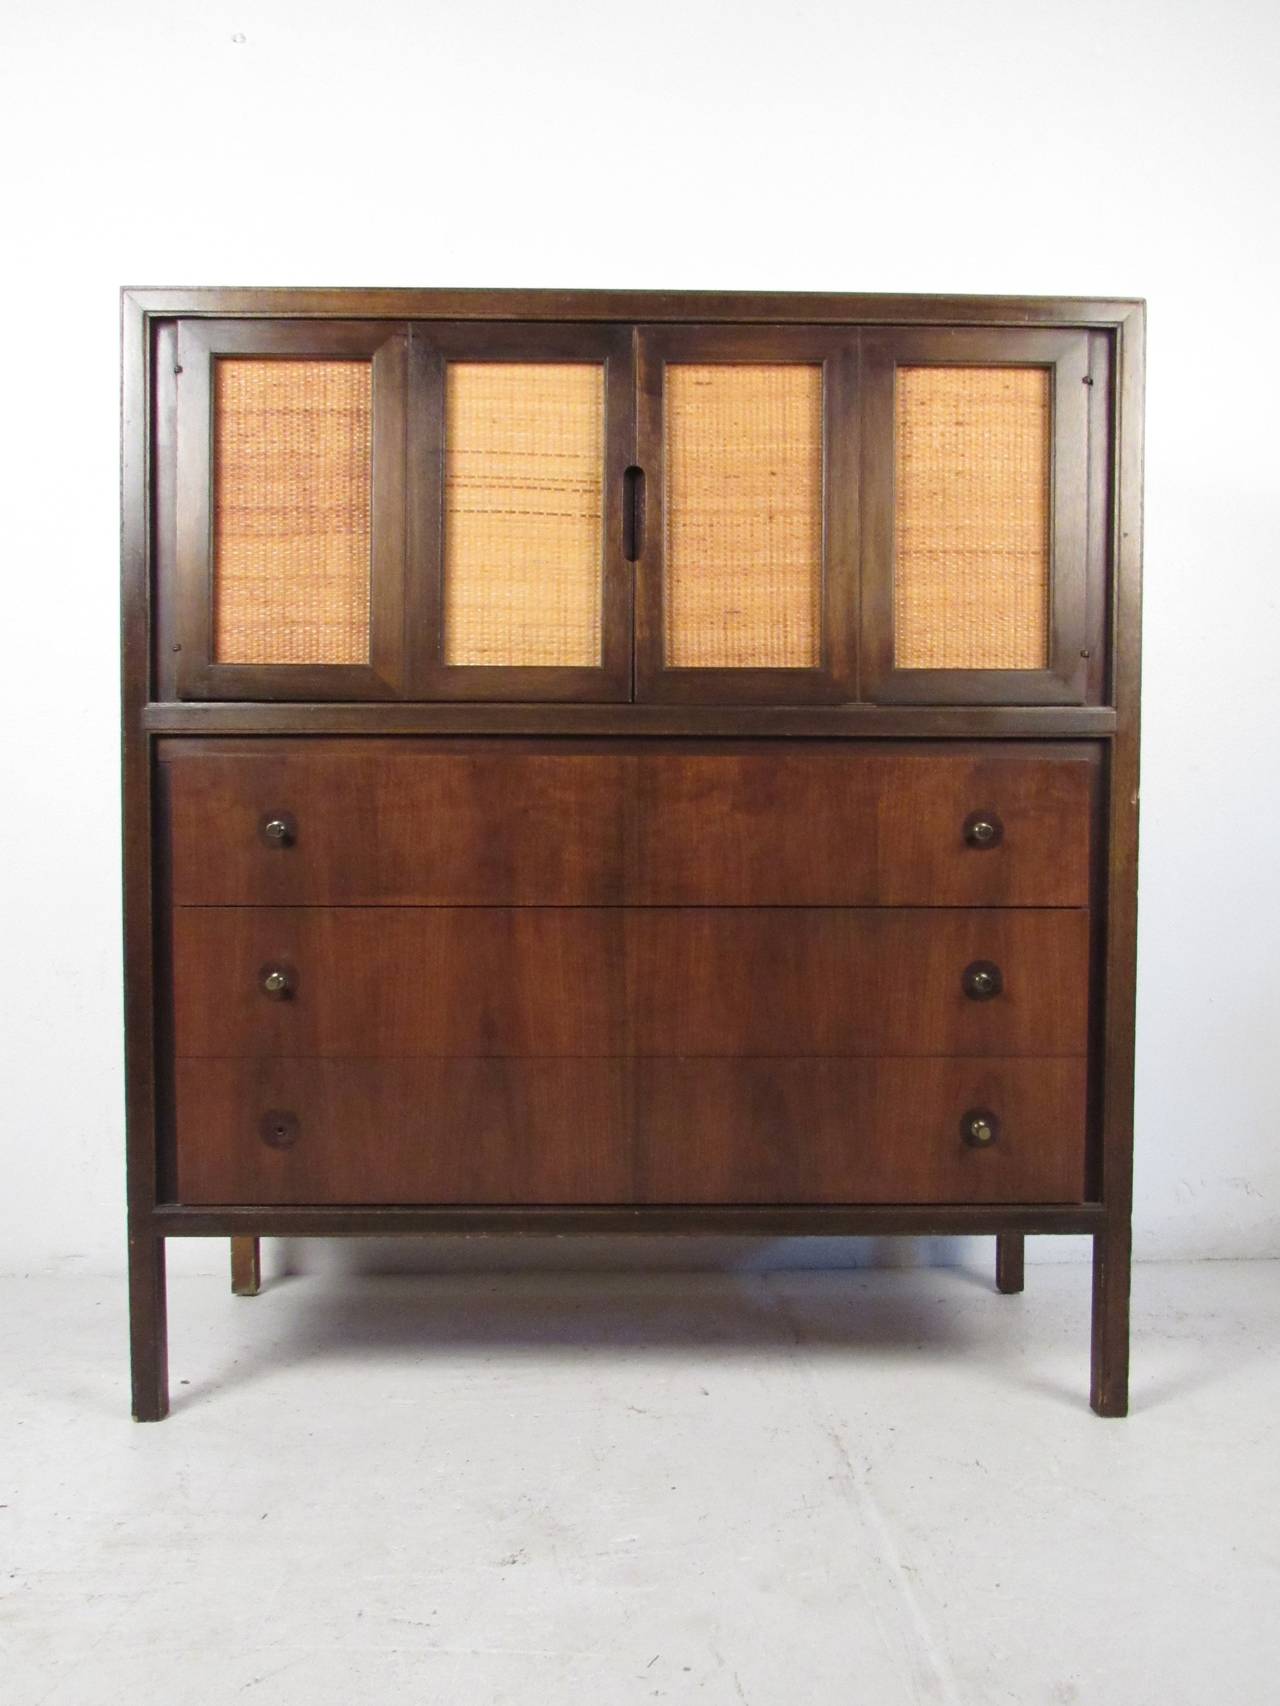 This midcentury high boy dresser by Basic Witz features a beautiful walnut finish, cane doors, and unique brass pulls which offers a modern accent and ample storage to any home or office space. Cane inserts are reversible with a black side